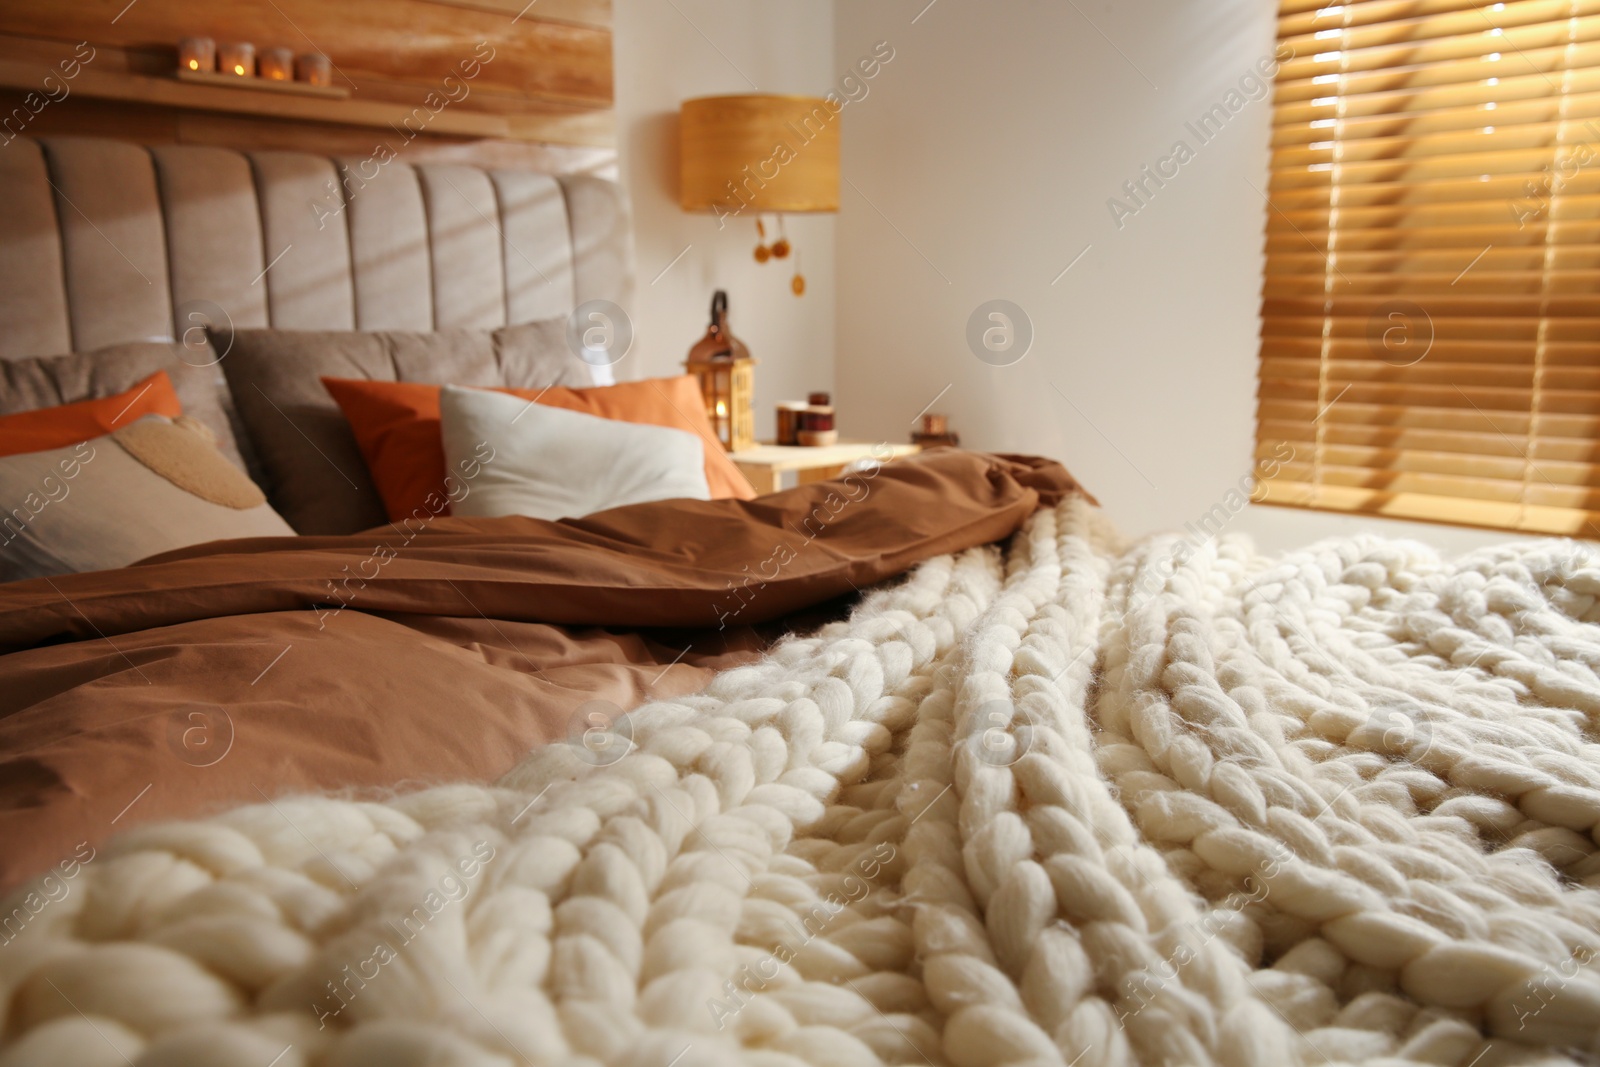 Photo of Bed with cozy knitted blanket and cushions indoors. Interior design